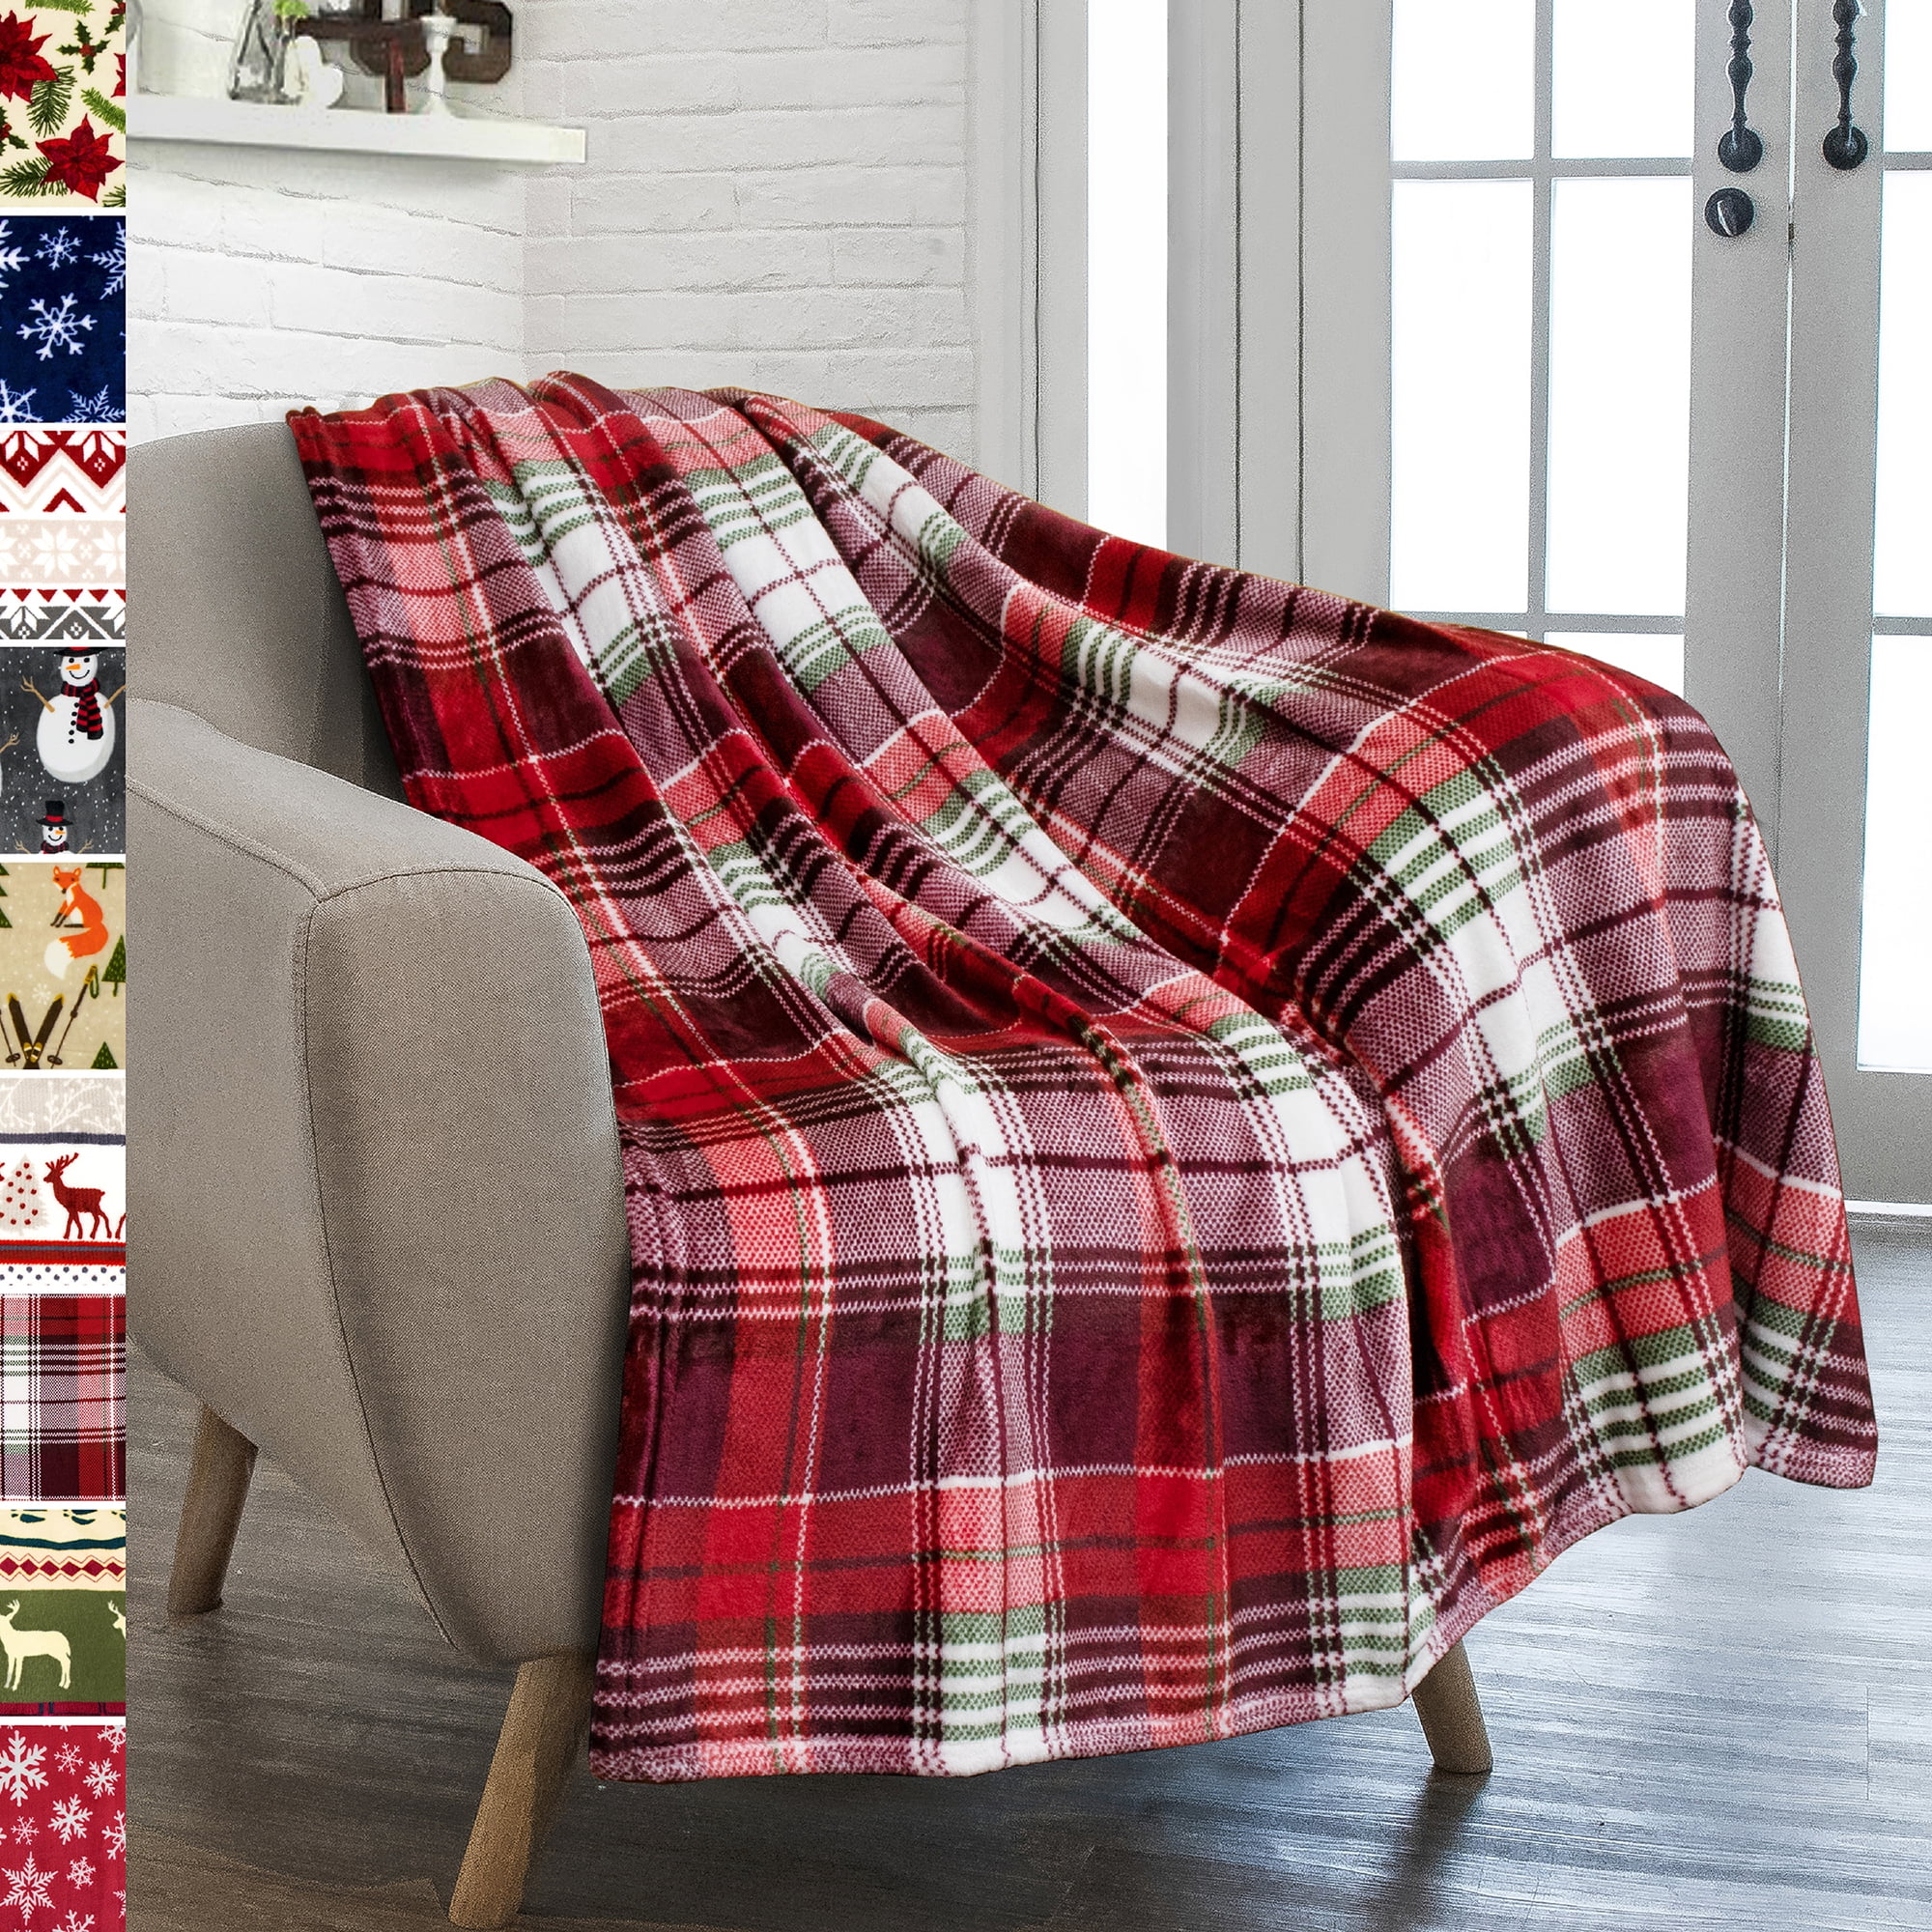 Classic Checked Tartan Blue Plush Soft Cosy Bed Living Room Blanket Covers Throw 